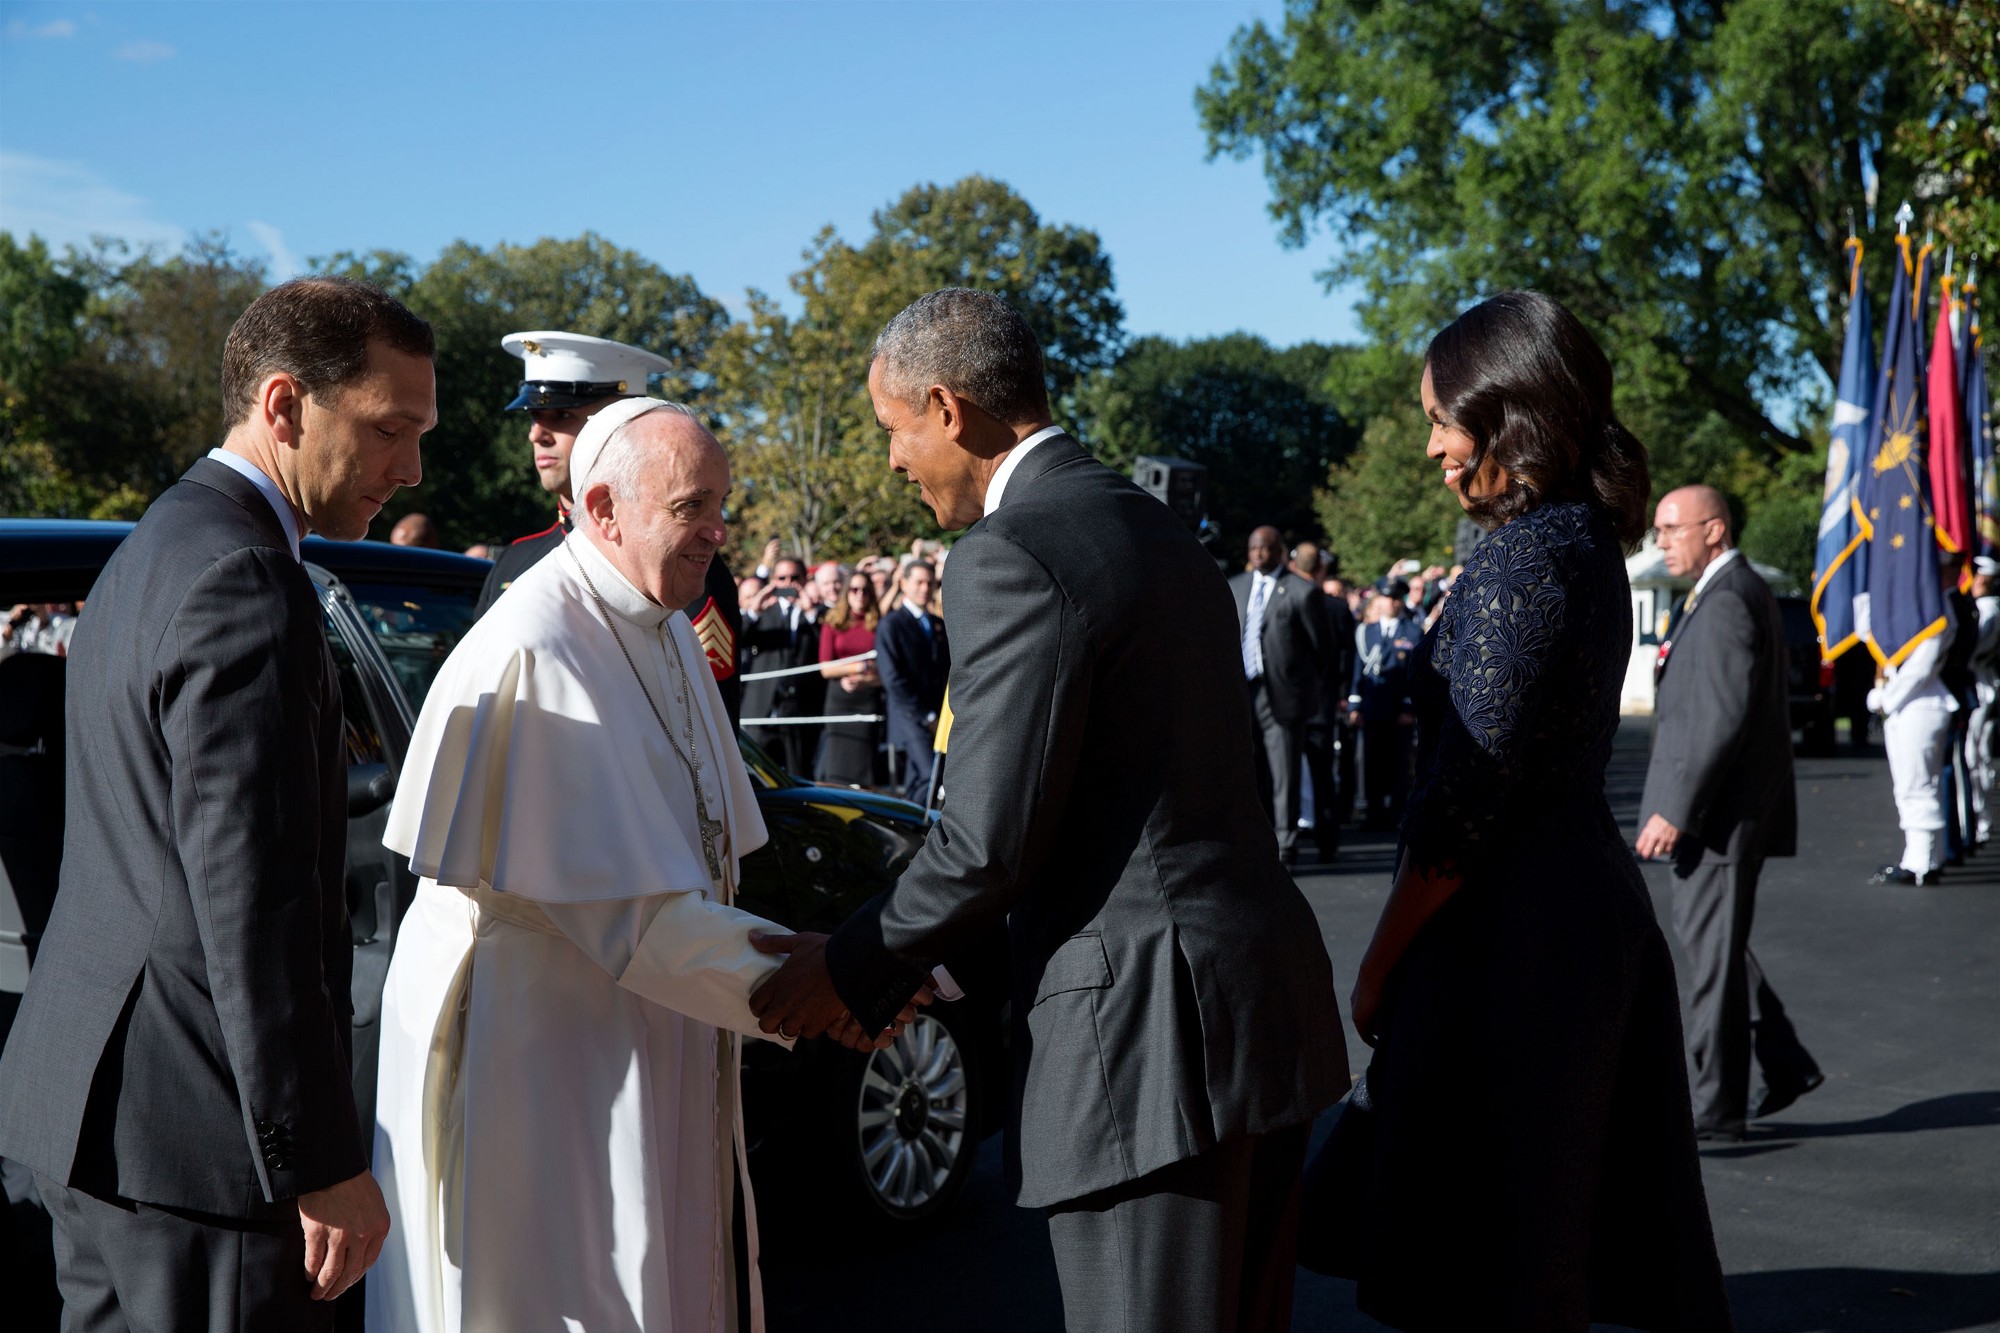 President Obama and the First Lady greet Pope Francis upon arrival for the State Arrival Ceremony. (Official White House Photo by Pete Souza)